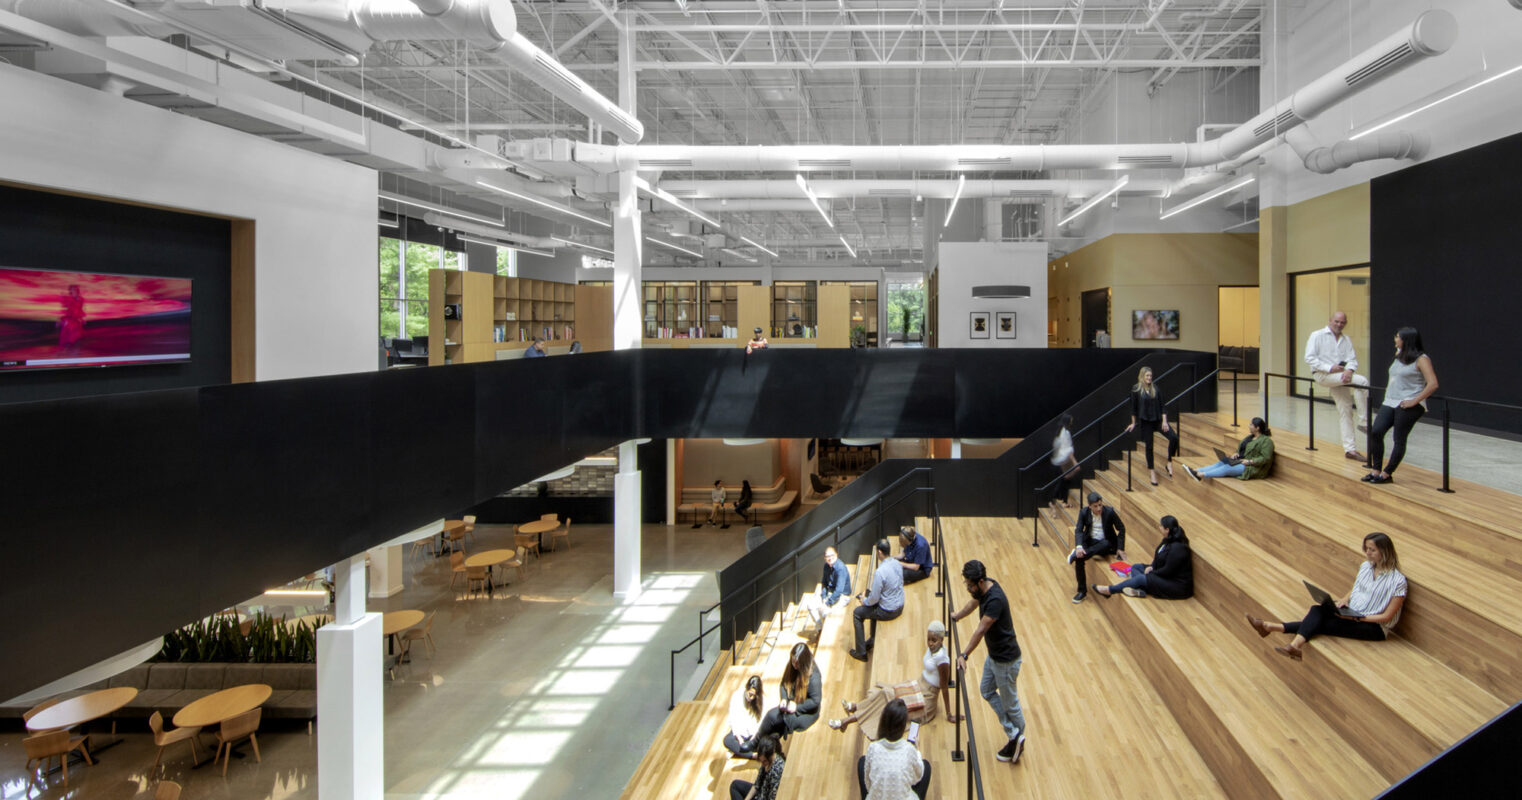 A modern, spacious indoor area with people sitting and standing on wooden steps. The space is characterized by a large white ceiling structure, creating an interesting architectural design that promotes social interaction and relaxation.